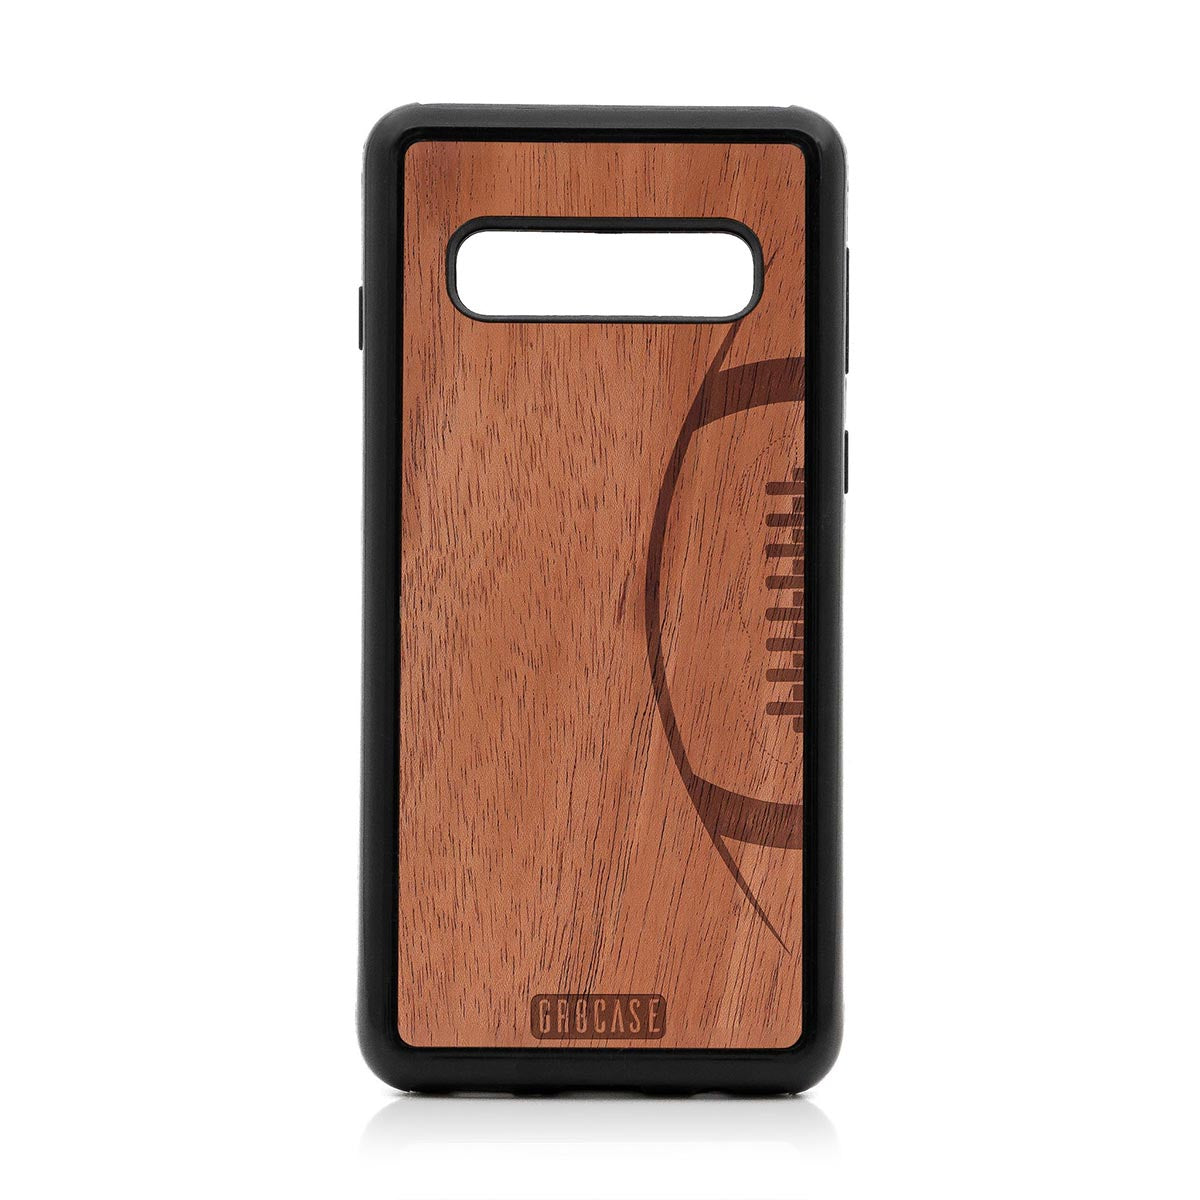 Football Design Wood Case For Samsung Galaxy S10 by GR8CASE